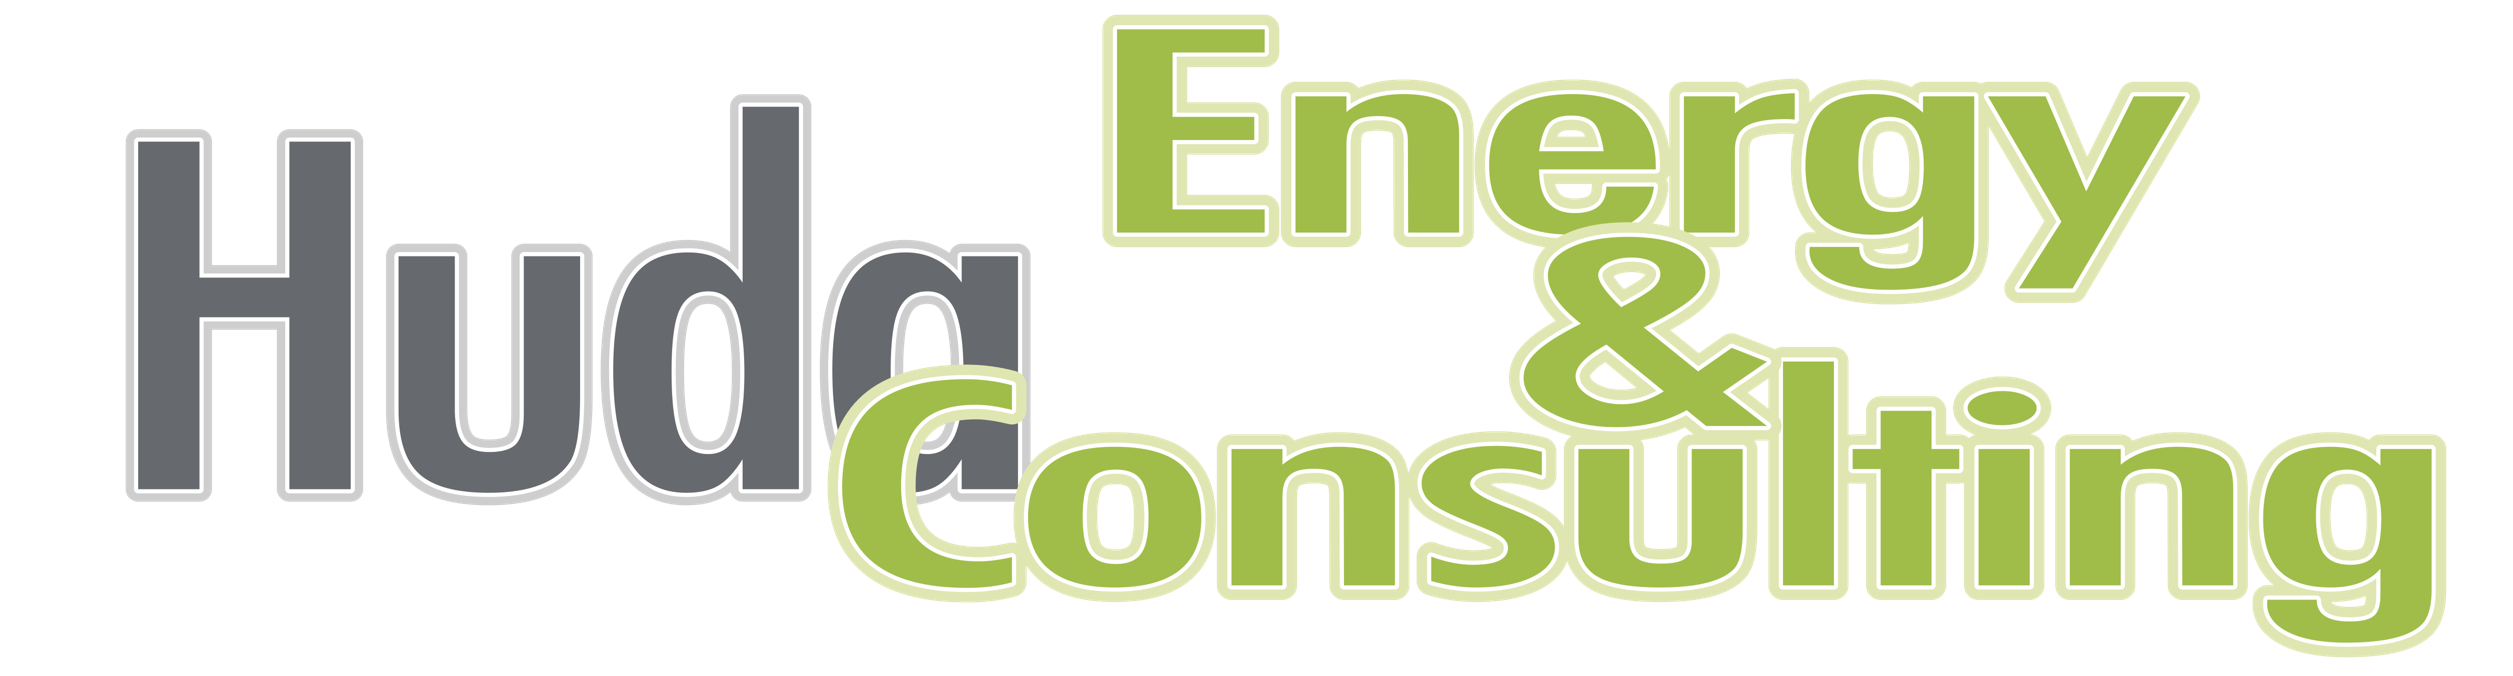 Huda Energy and Consulting